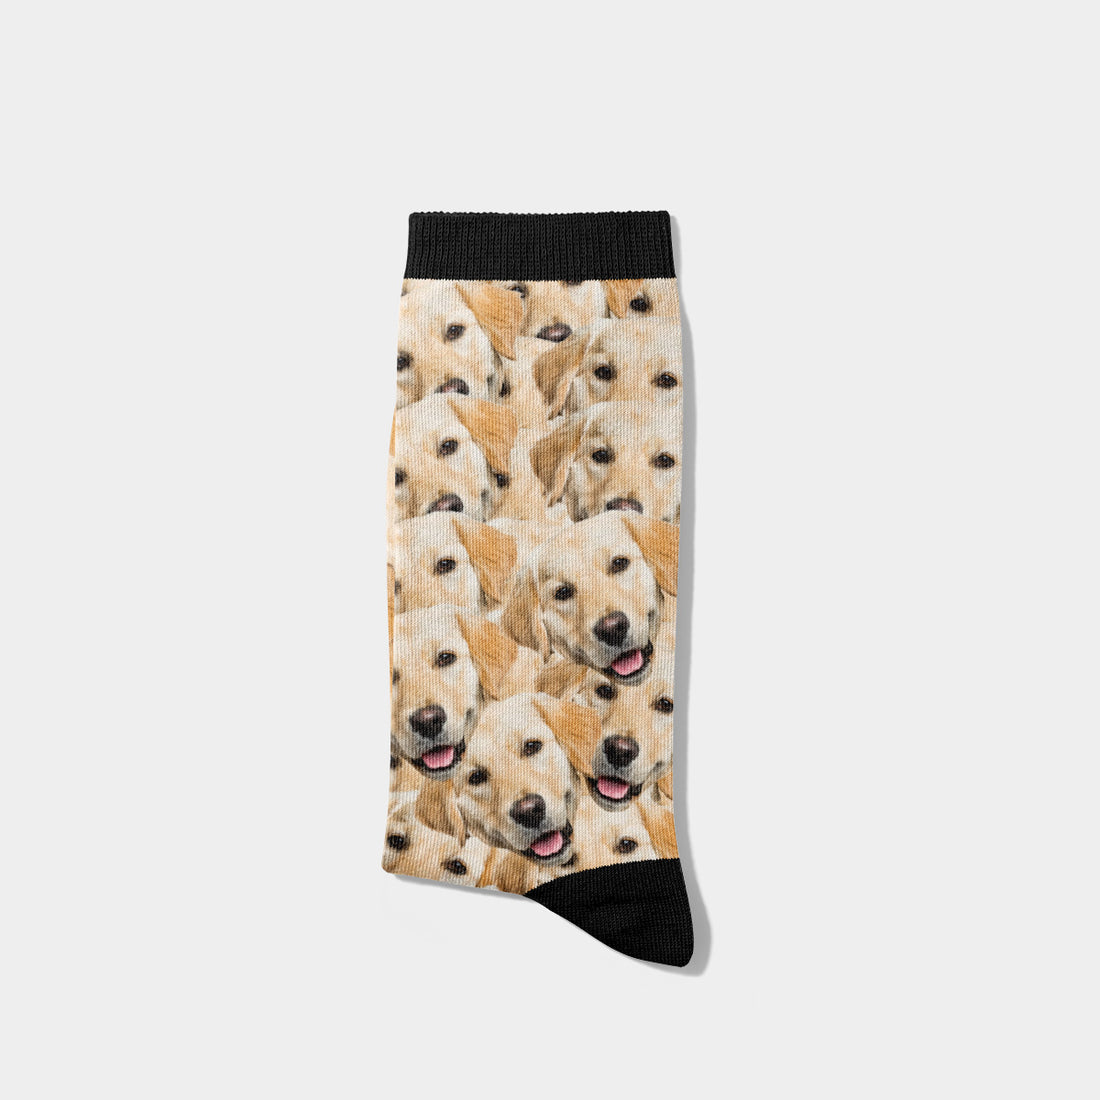 Personalized Socks with Many Pet Faces